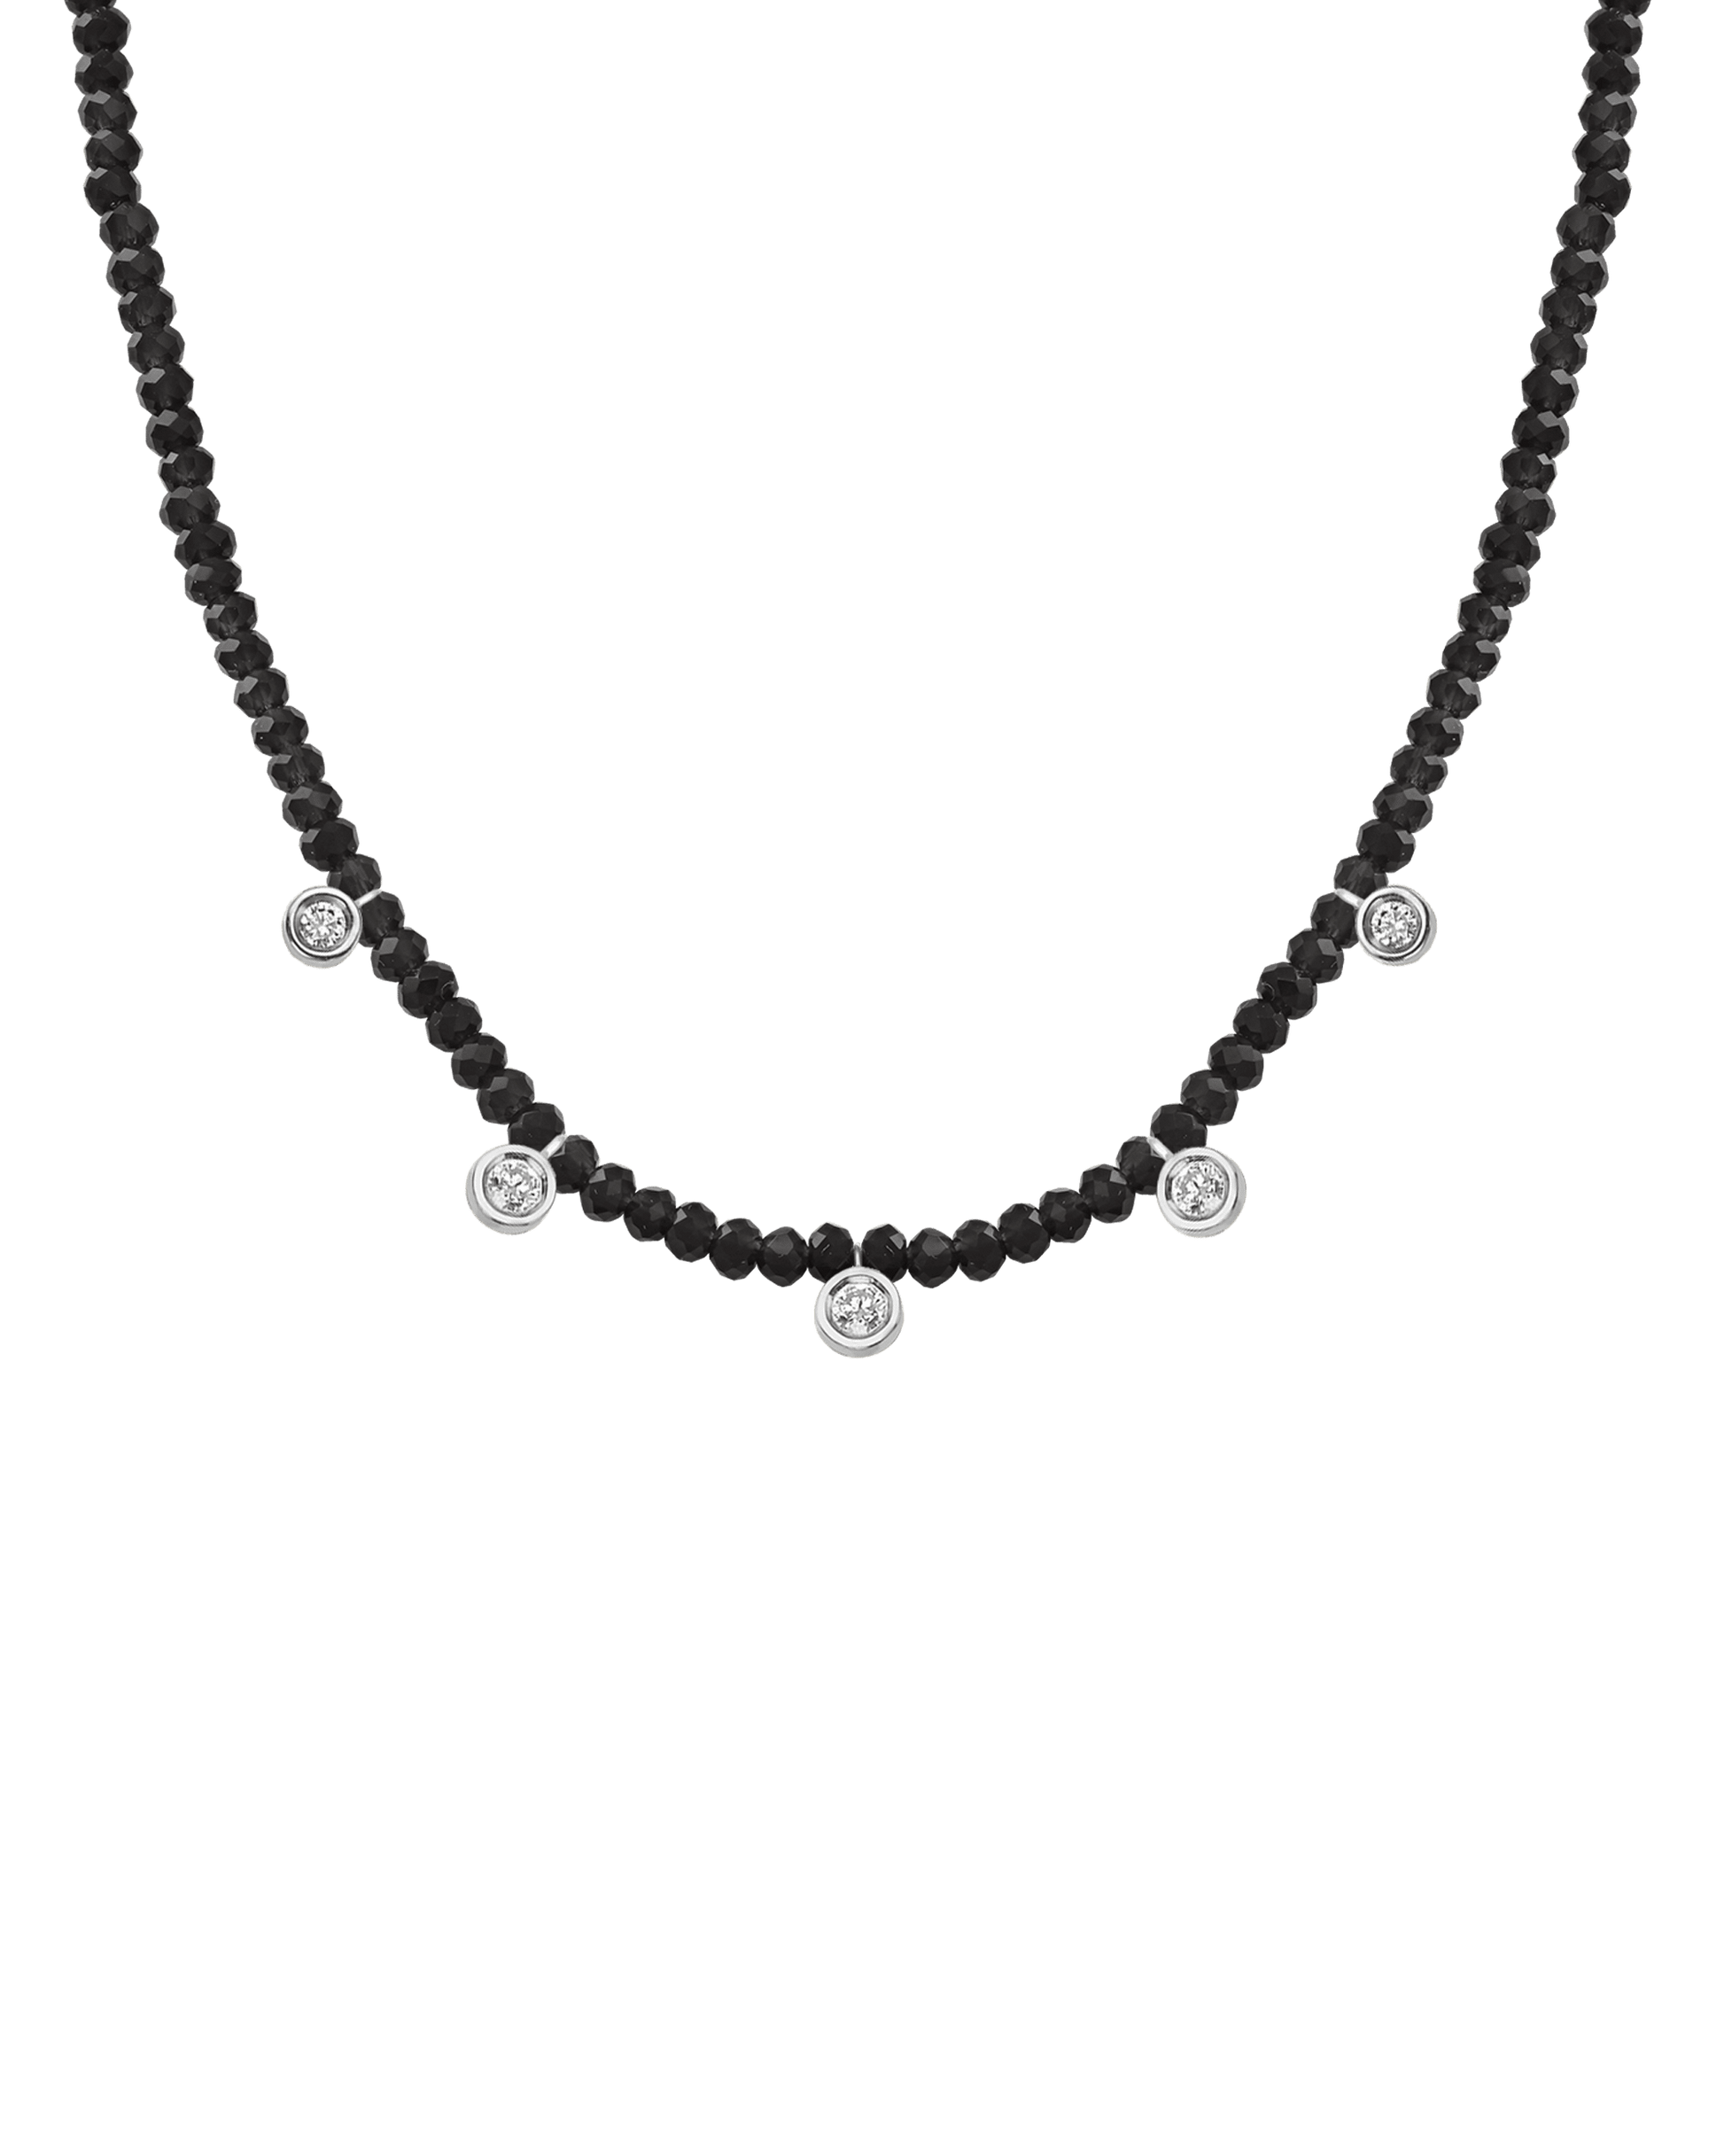 Moonstone Gemstone & Five diamonds Necklace - 14K White Gold Necklaces magal-dev Glass Beads Black Spinnel 14" - Collar 